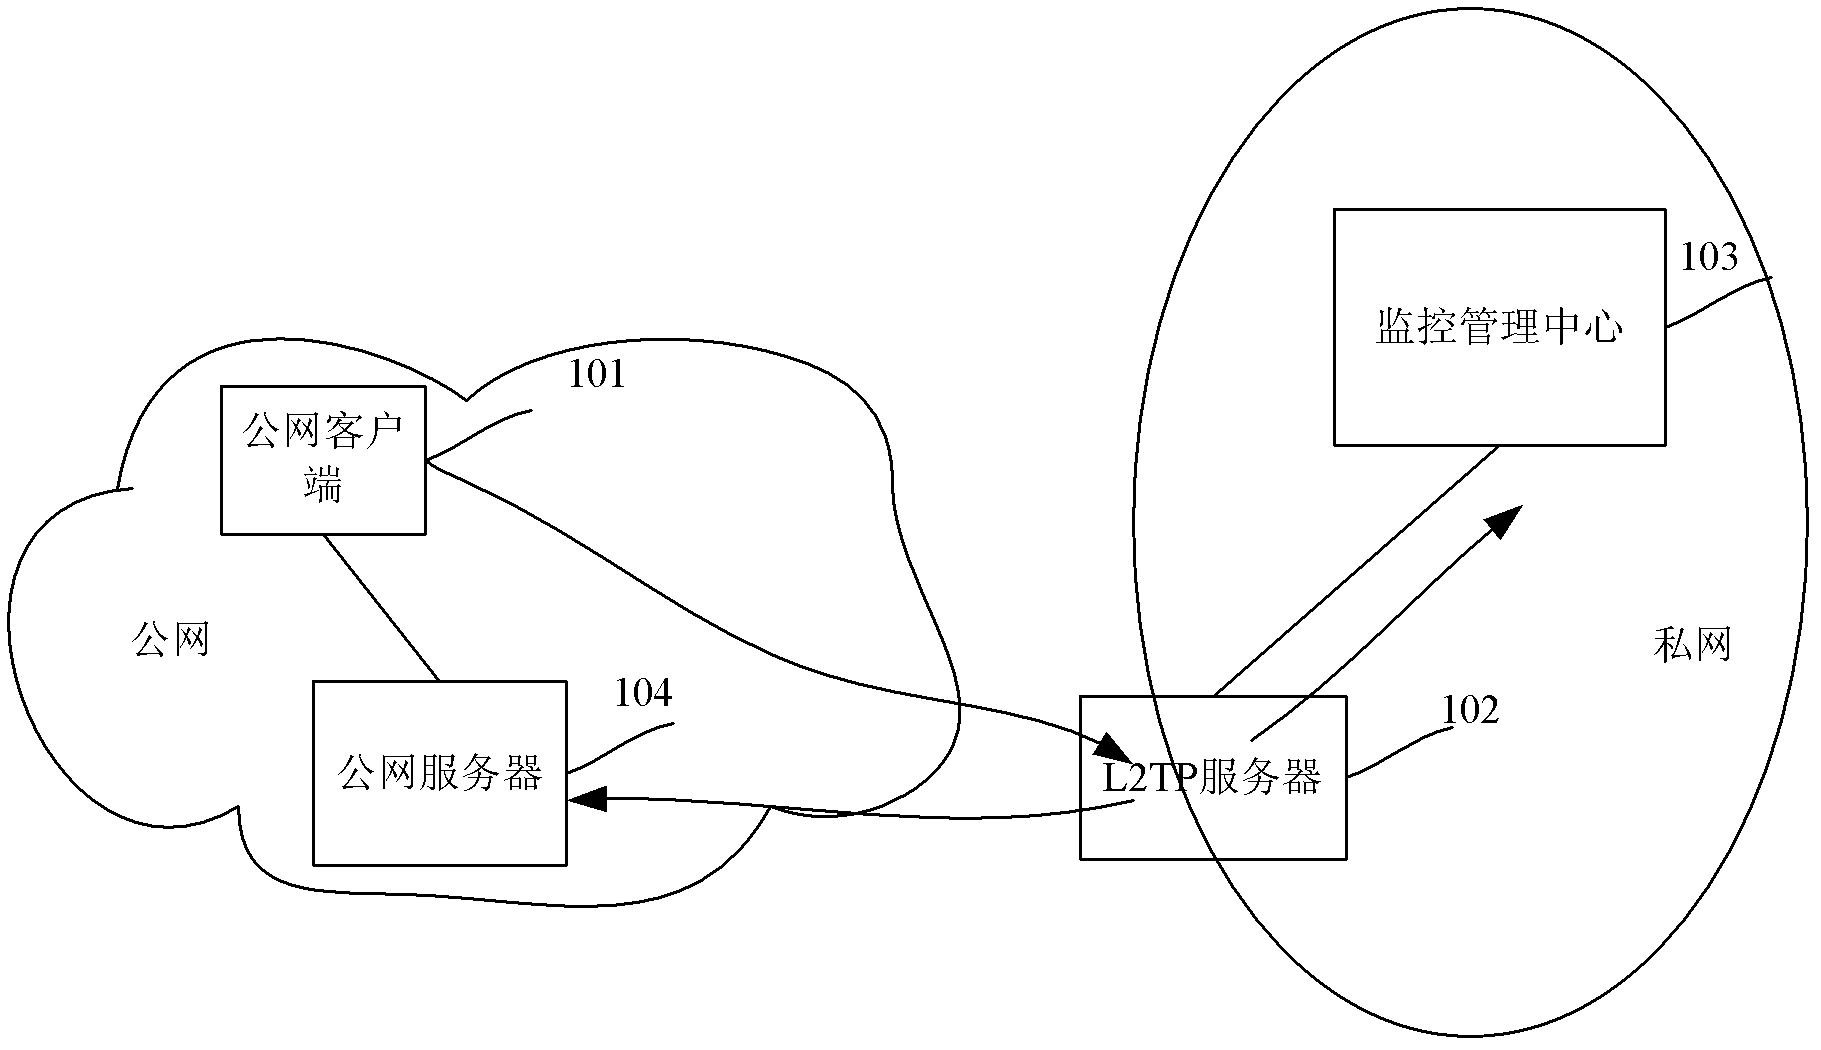 Method for accessing private network through layer 2 tunneling protocol and server